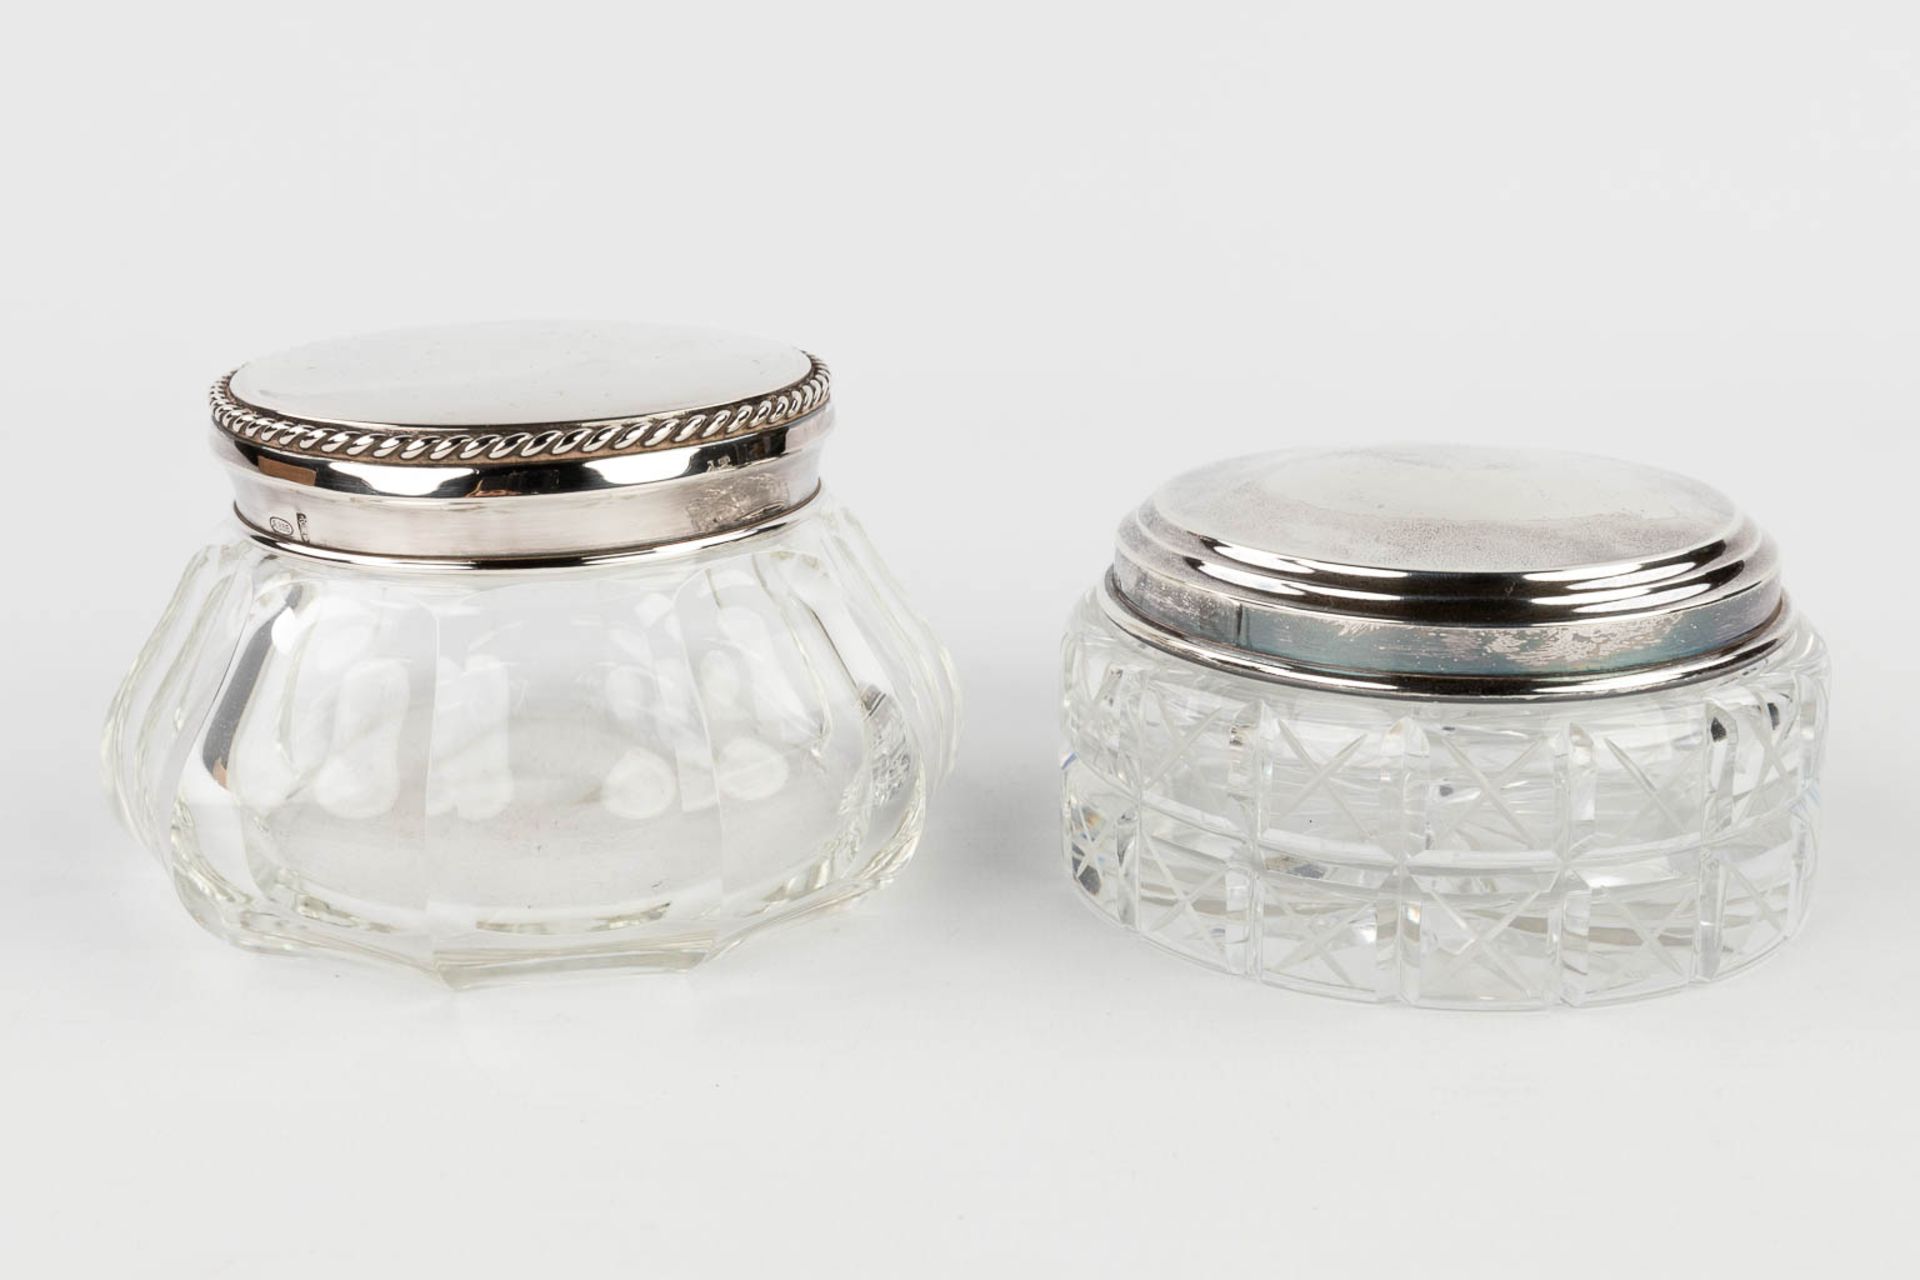 A collection of toilet accessories and goods, crystal, silver and silver-plated metal. (H: 12 cm) - Bild 3 aus 19